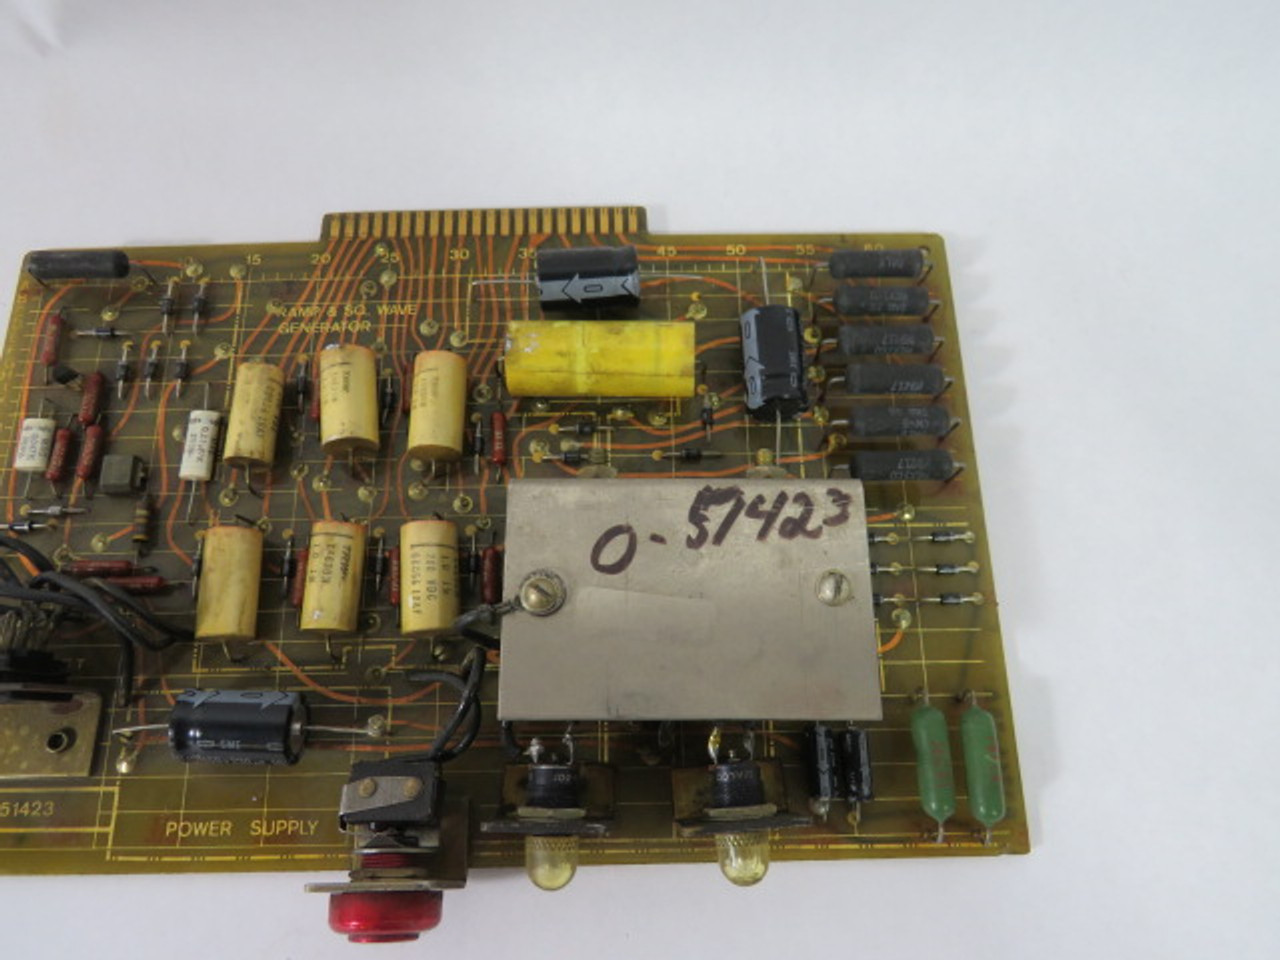 Reliance Electric 0-51423 Power Supply PC Board USED